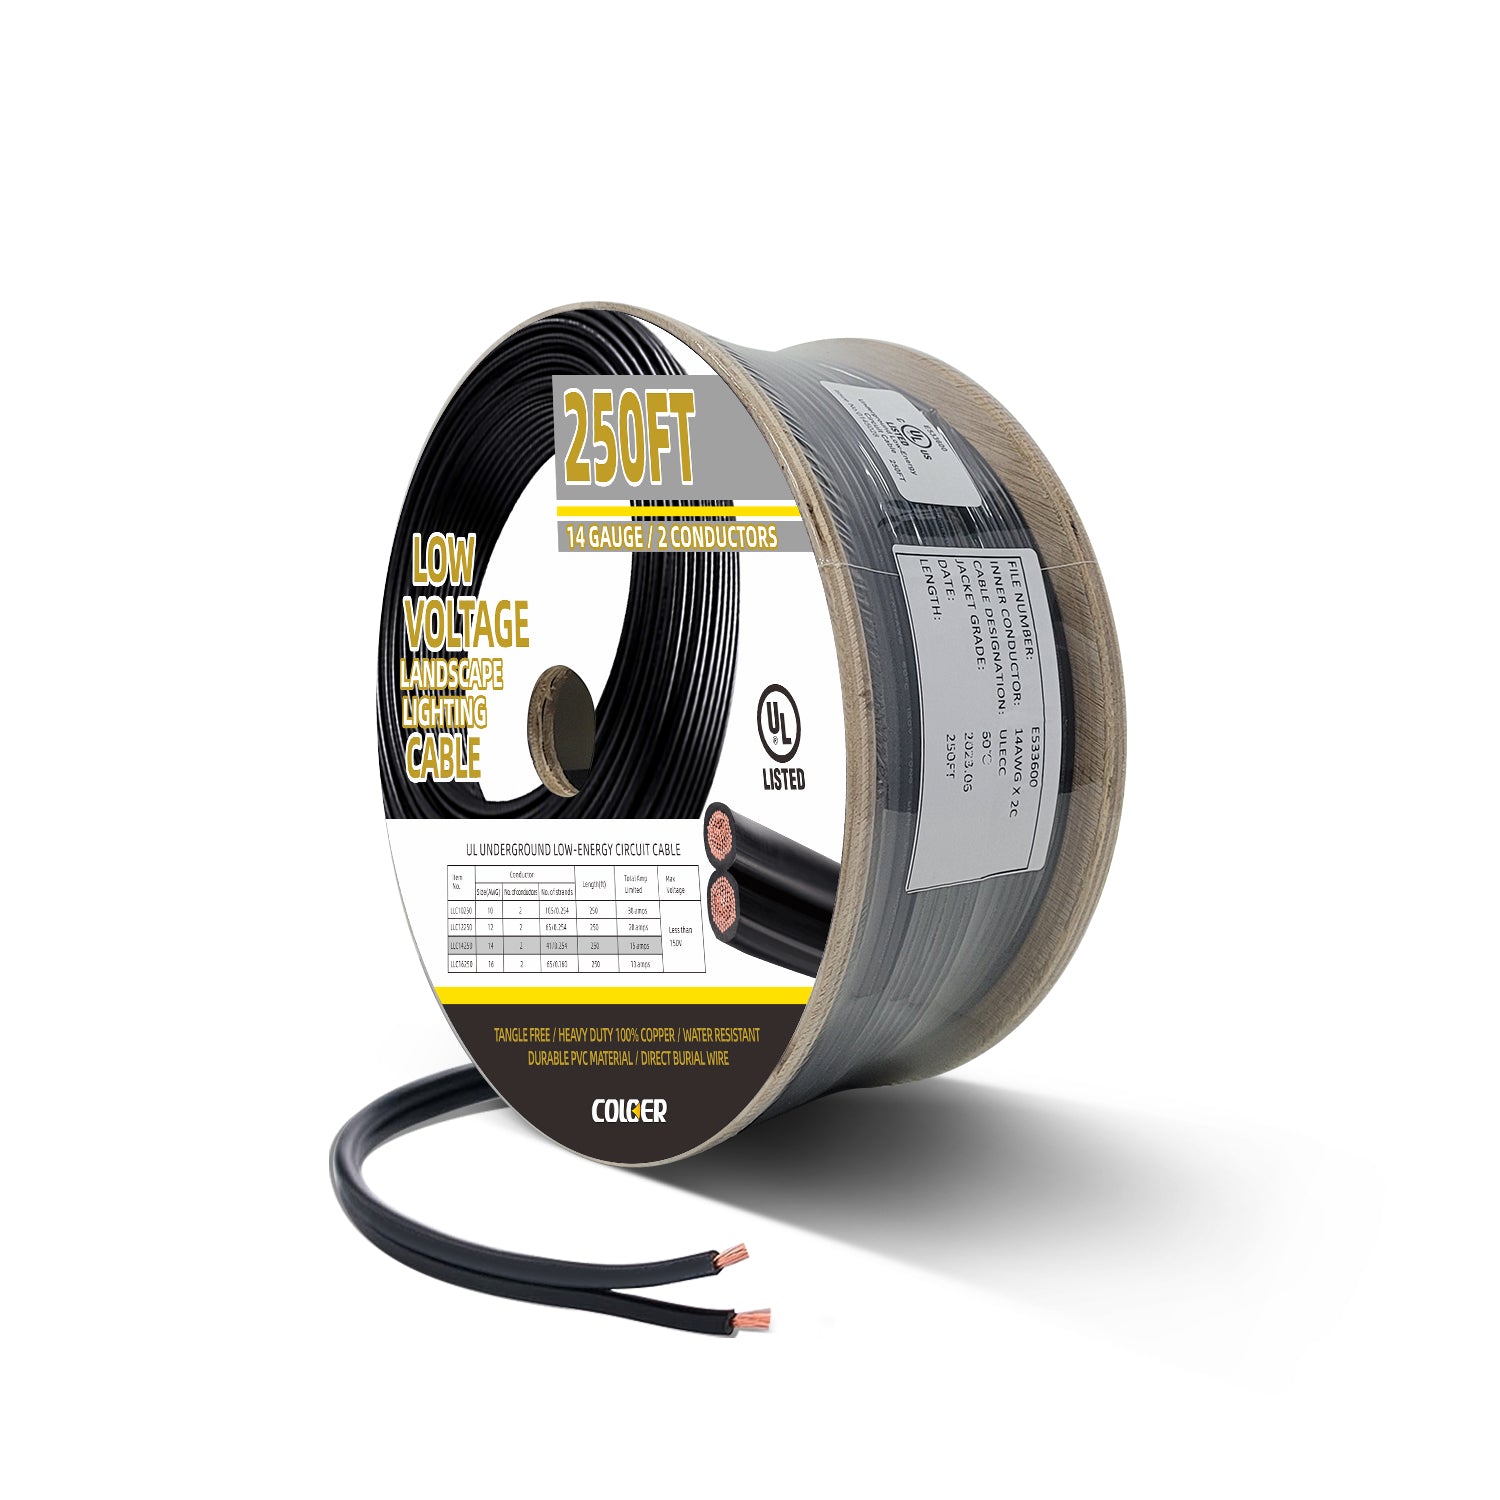 14 Gauge Low Voltage Landscape Wire | 2 Conductor Outdoor Landscape Lighting Direct Burial Electrical Cable COW1103B